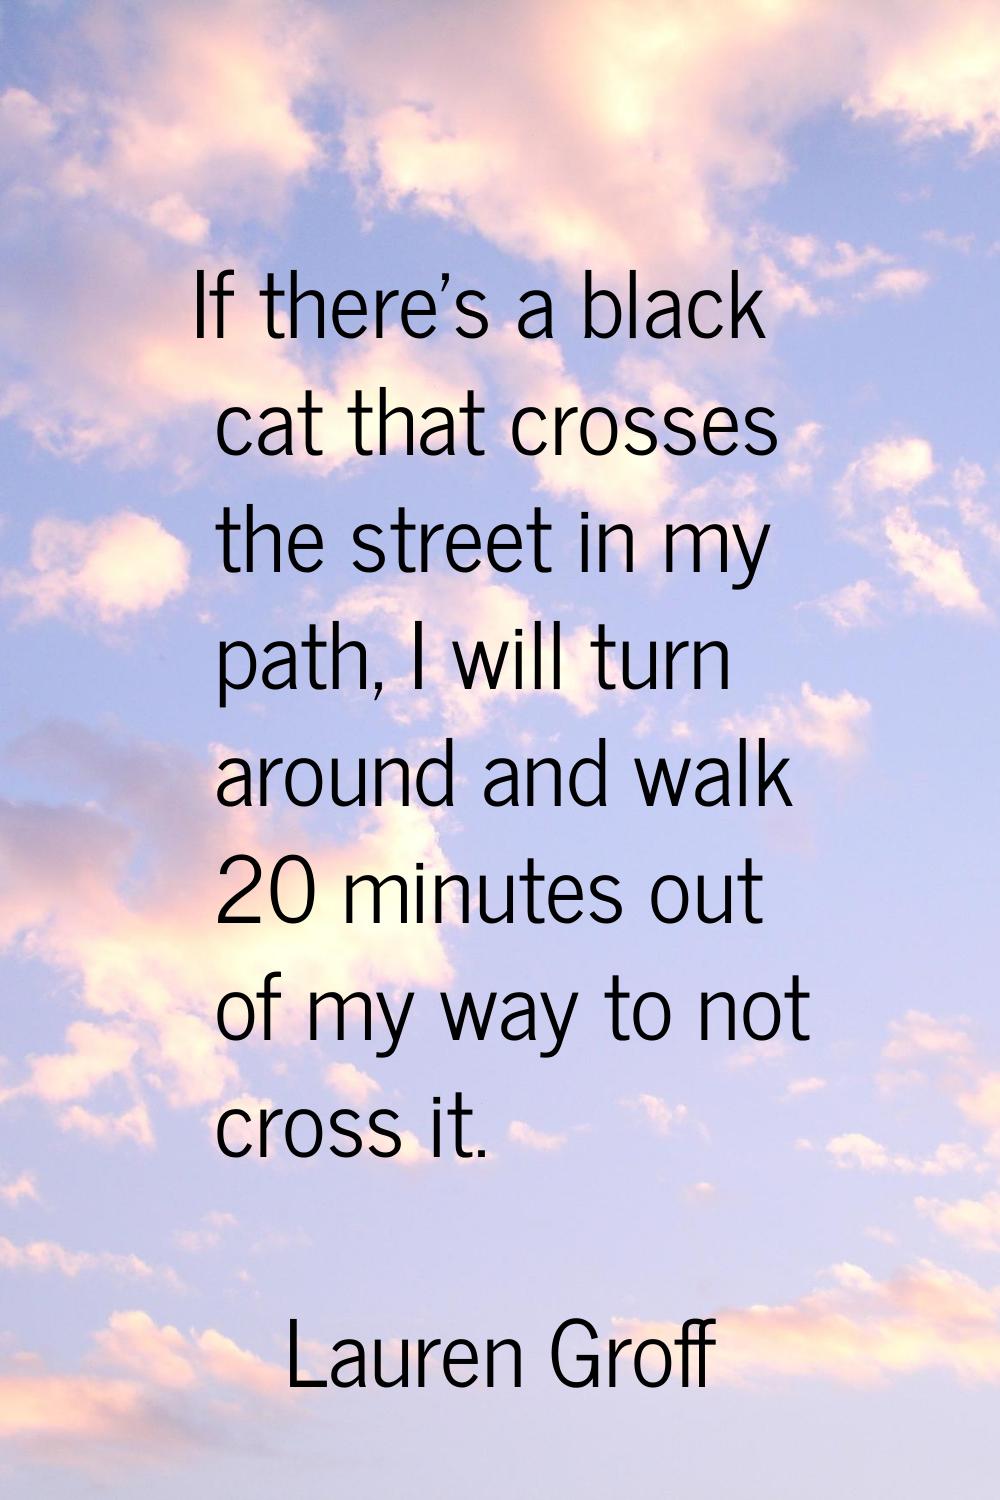 If there's a black cat that crosses the street in my path, I will turn around and walk 20 minutes o